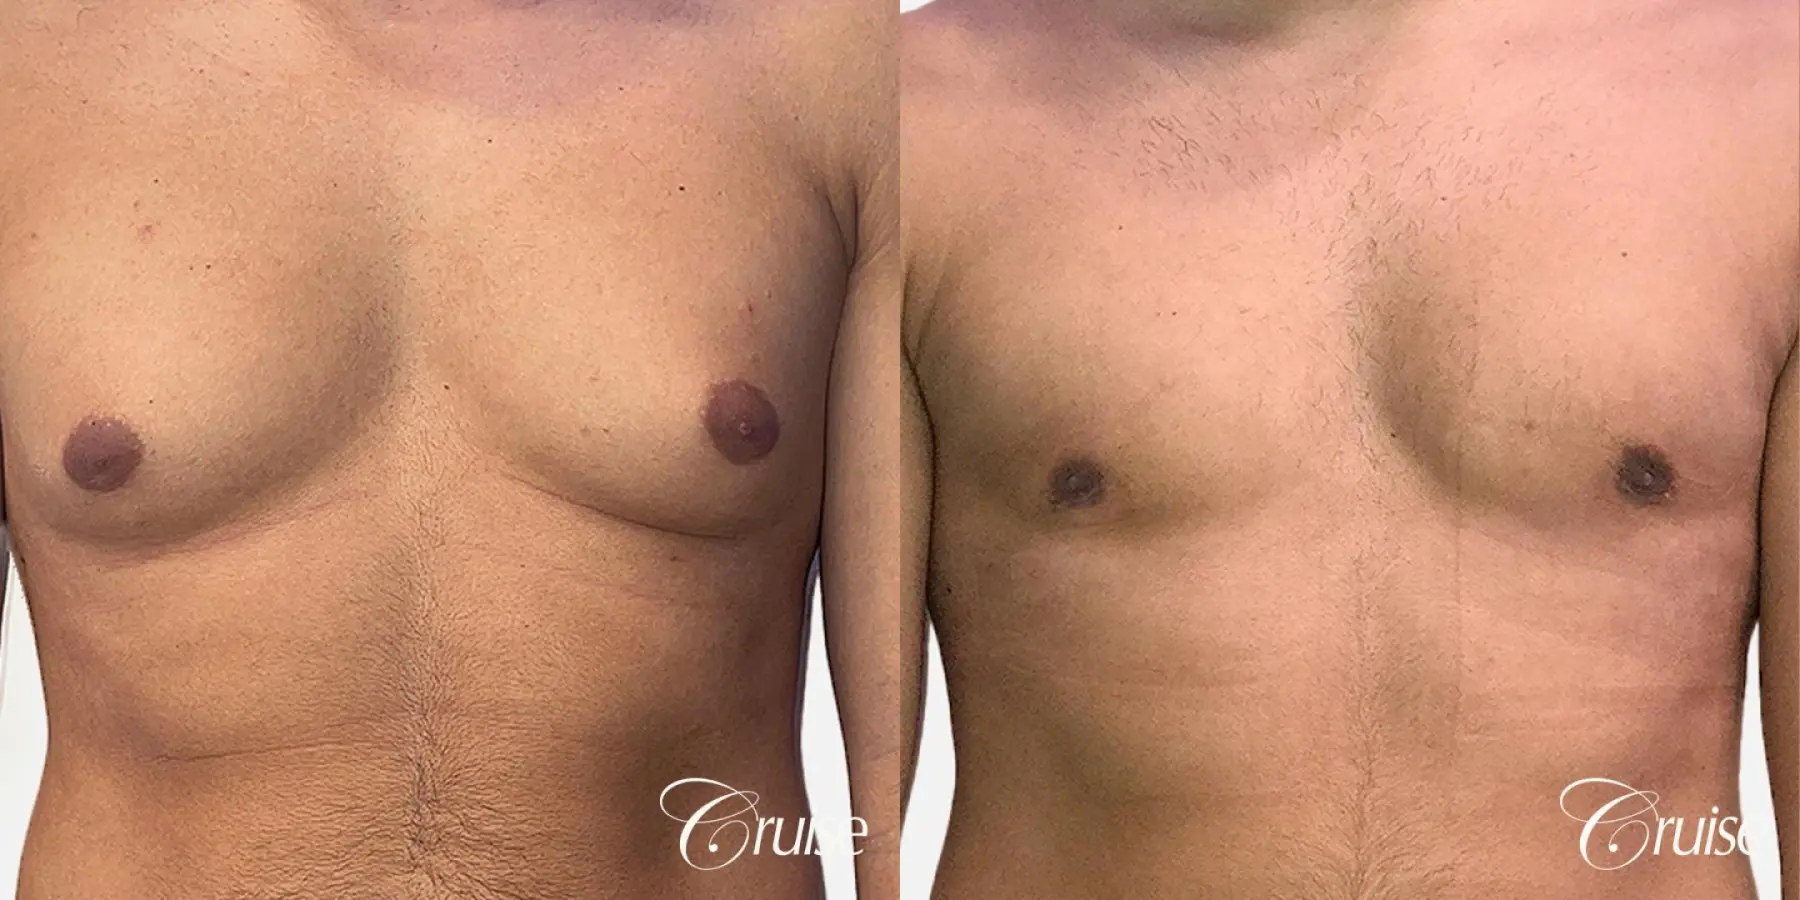 Type 2 Latino Gynecomastia Removal - Before and After